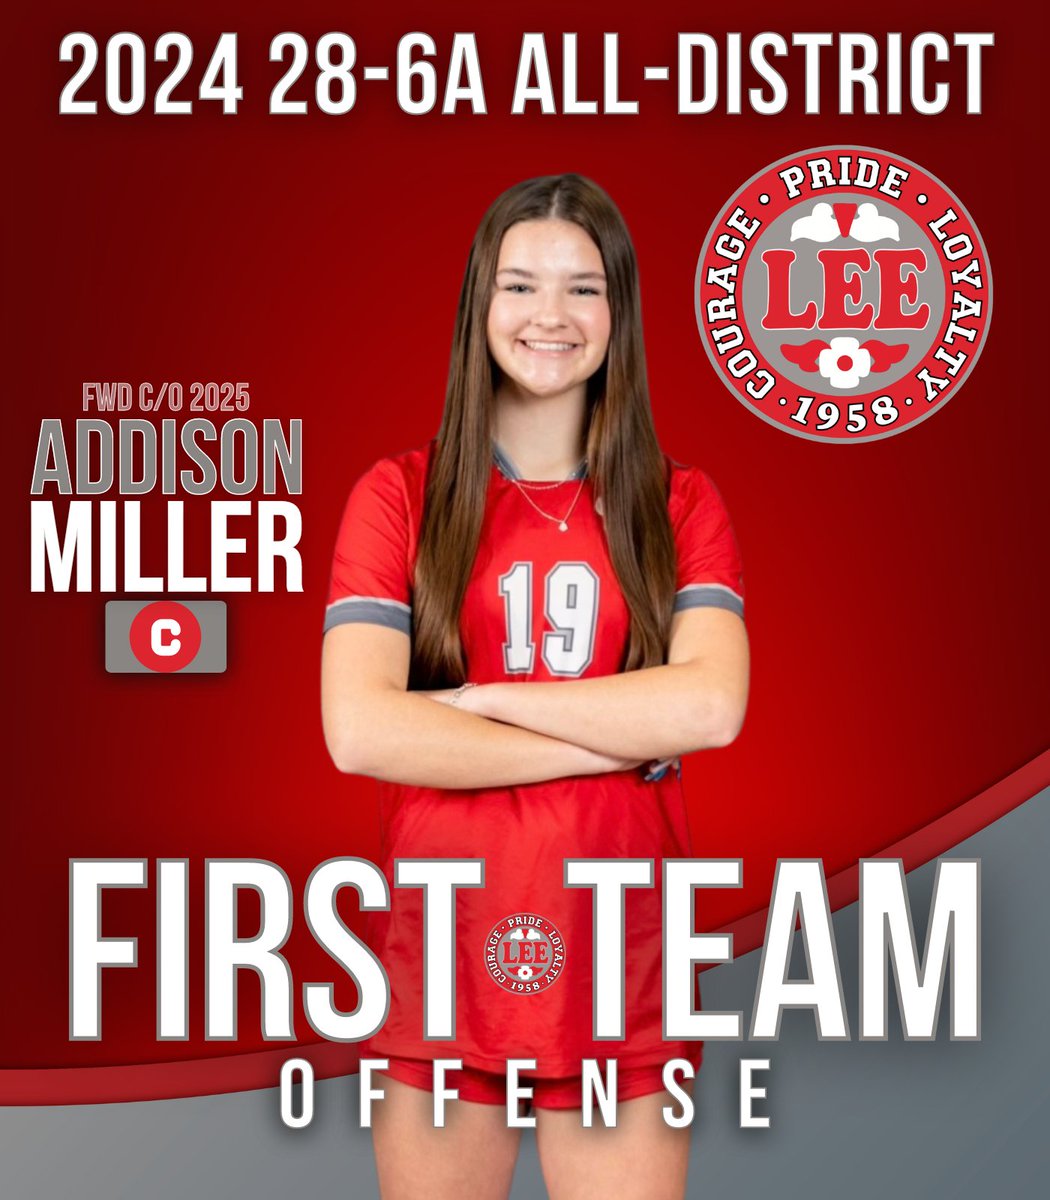 Congratulations to Junior Captain @_addisonmiller, for being selected to the 2024 28-6A All-District First Team! #GoVols